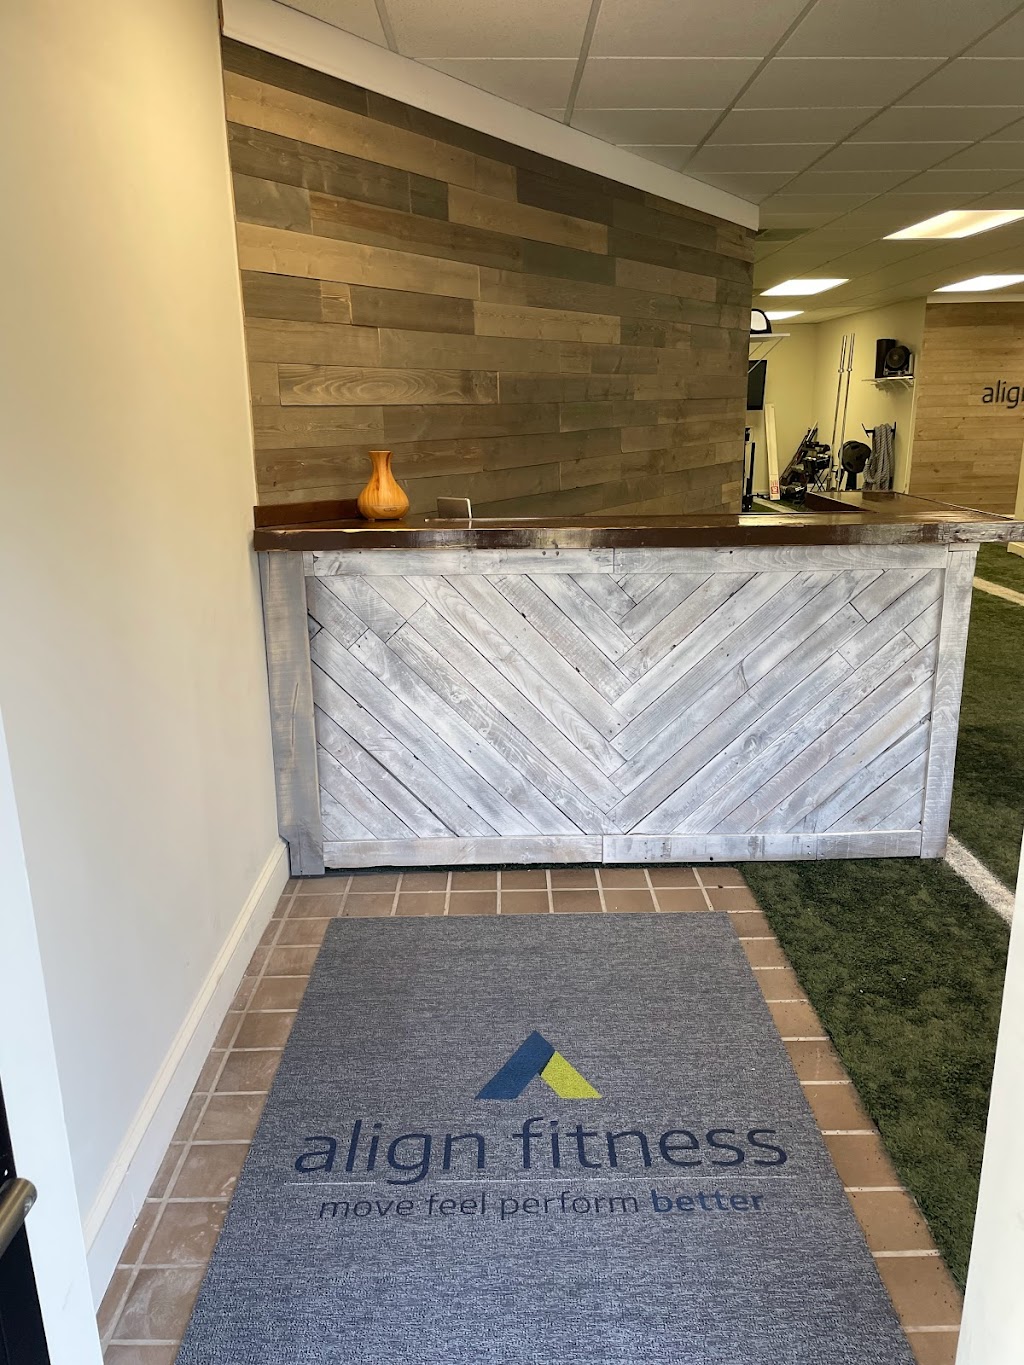 Align Fitness | Personal Fitness Training | Nutrition Coaching | 1786 Wilmington Pike, Glen Mills, PA 19342 | Phone: (484) 402-6477